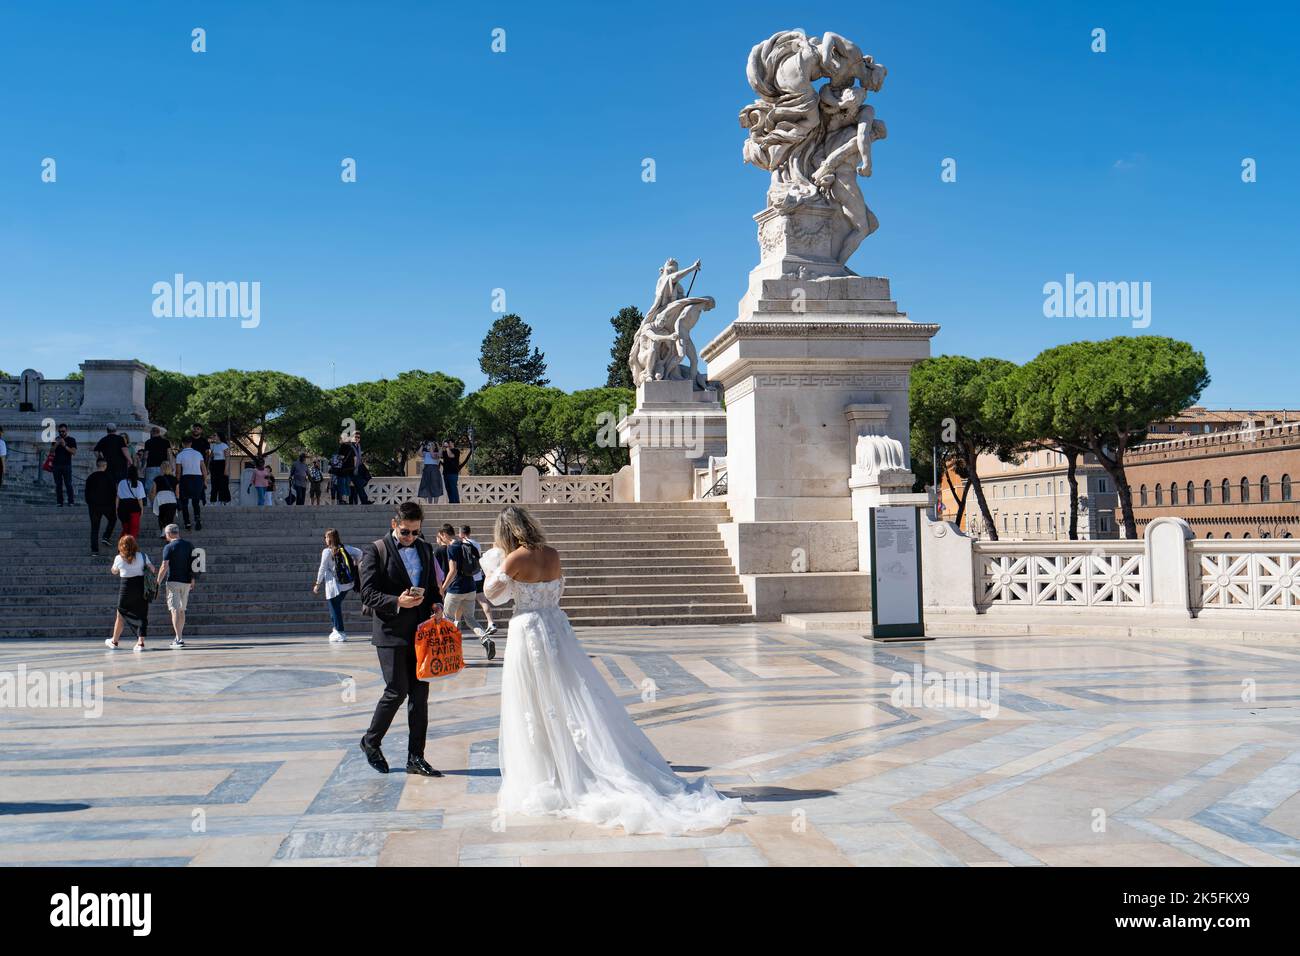 A couple in wedding clothes at The Victor Emmanuel II Monument, (Altare della Patria or Wedding Cake), Rome, Italy Stock Photo